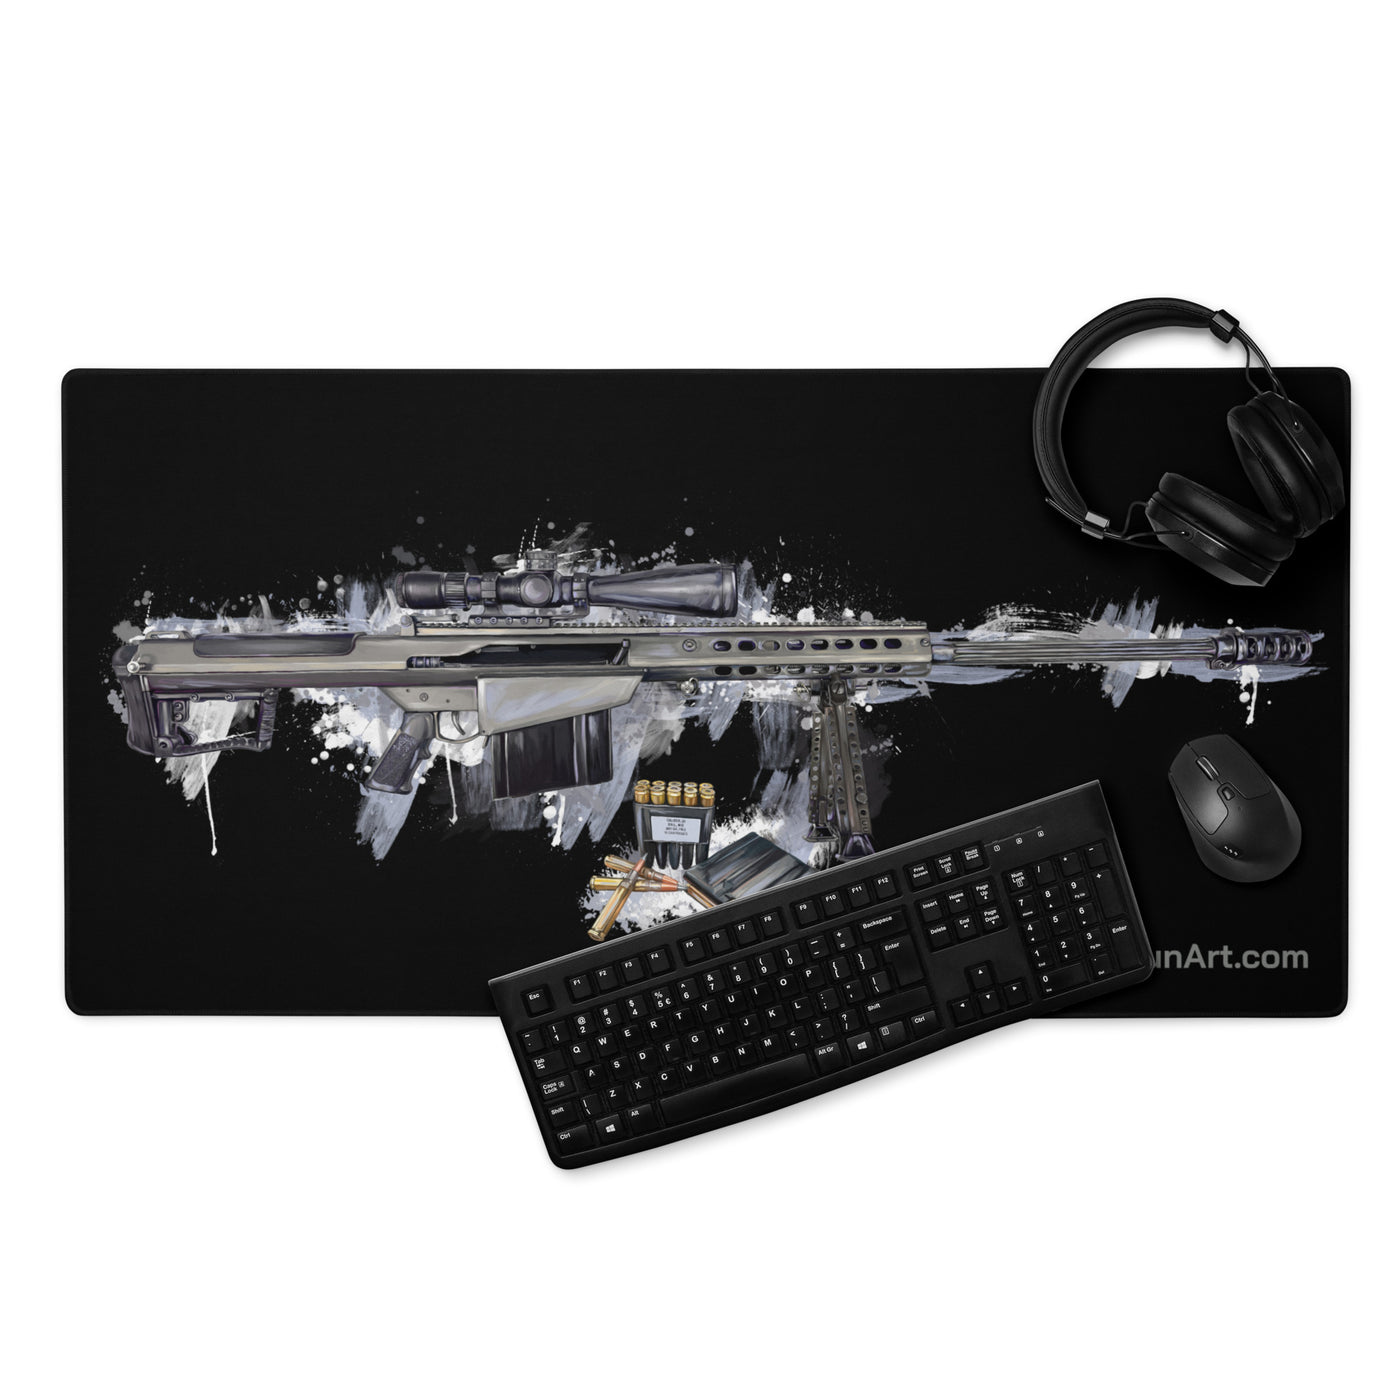 The Long-Range Legend - Blue .50 Cal BMG Rifle Gaming Mouse Pad - Black Background